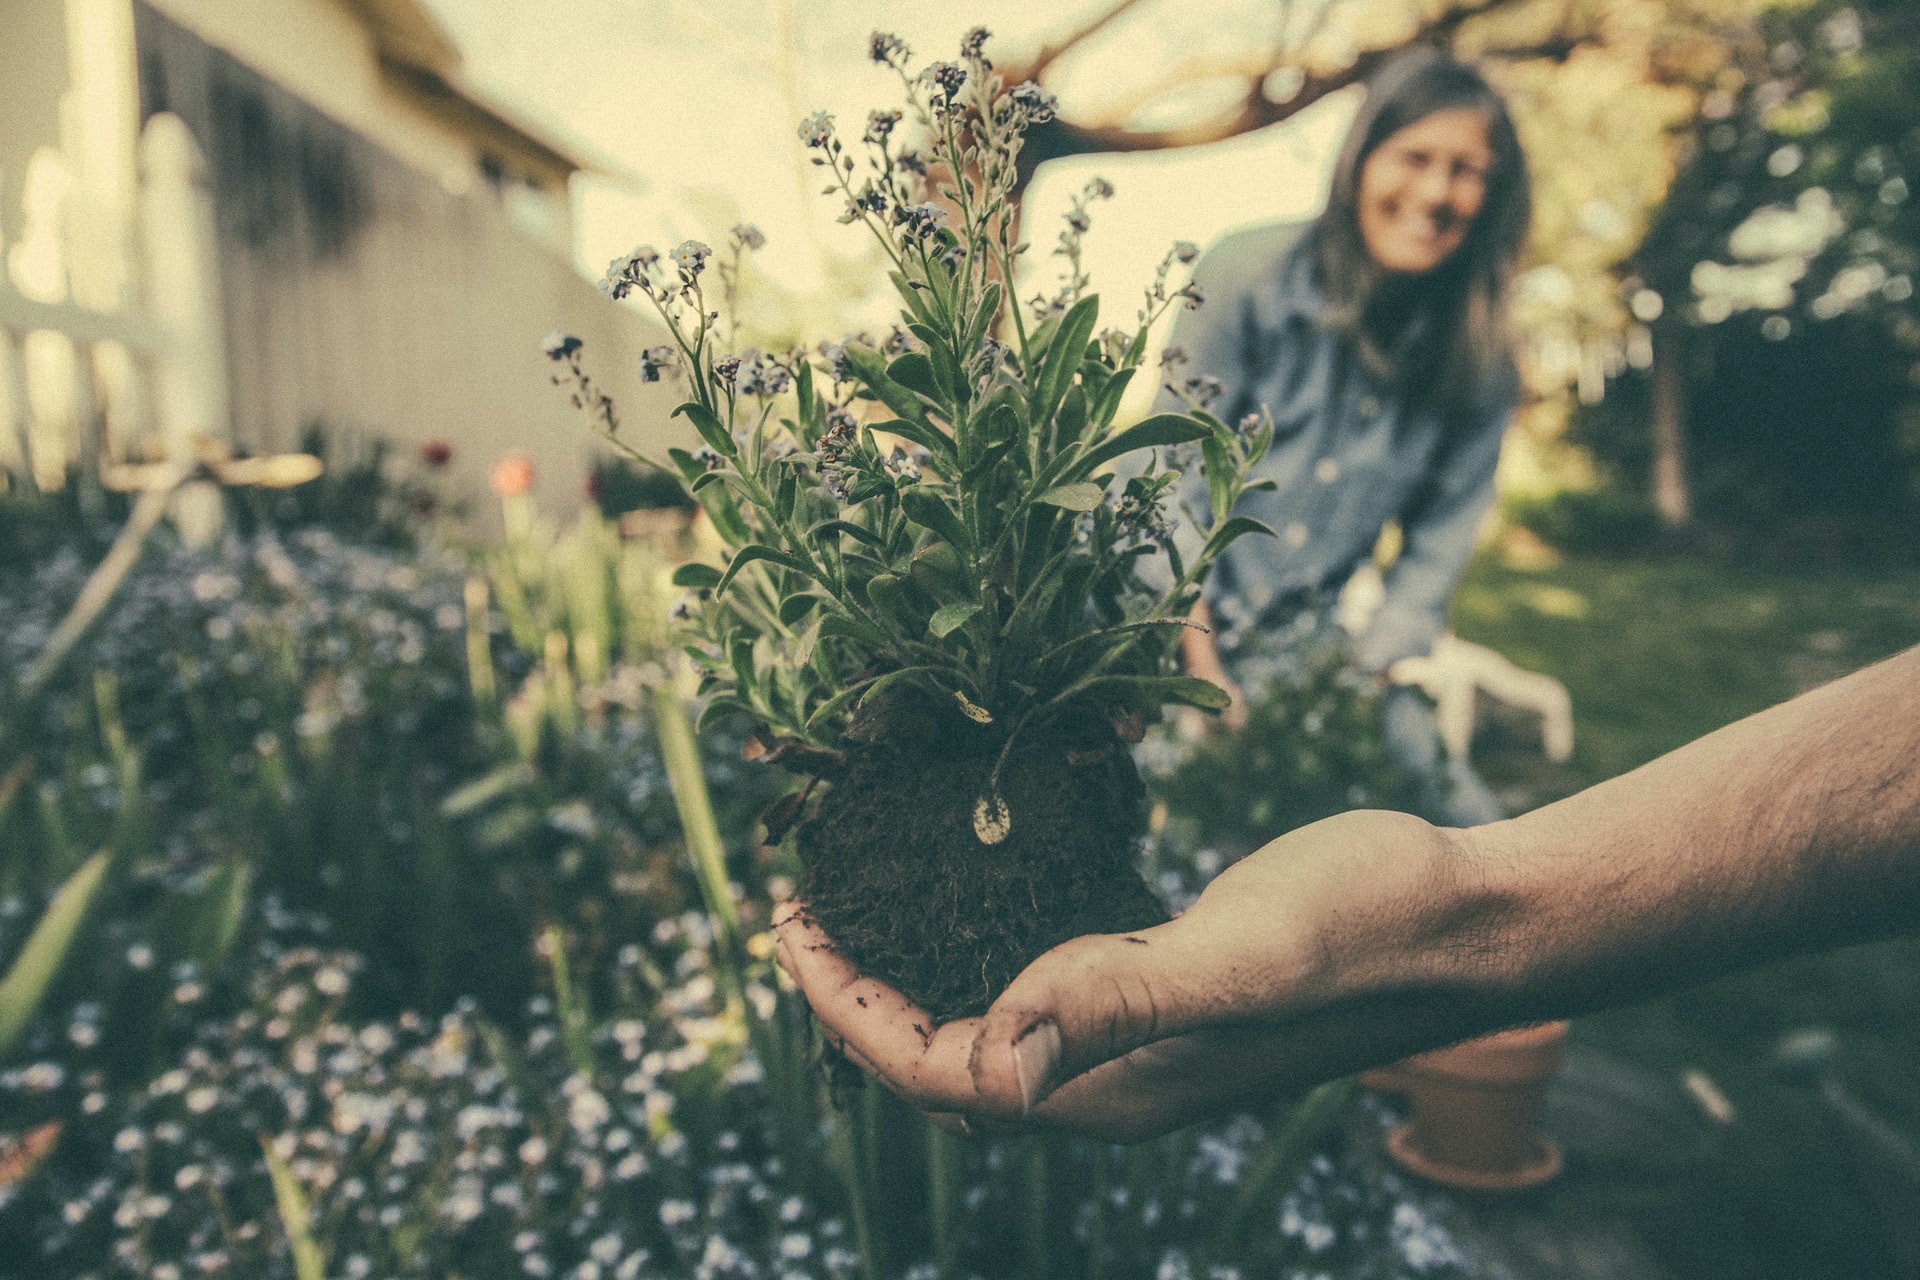 Hand holding a plant with an unfocused woman laughing in the background